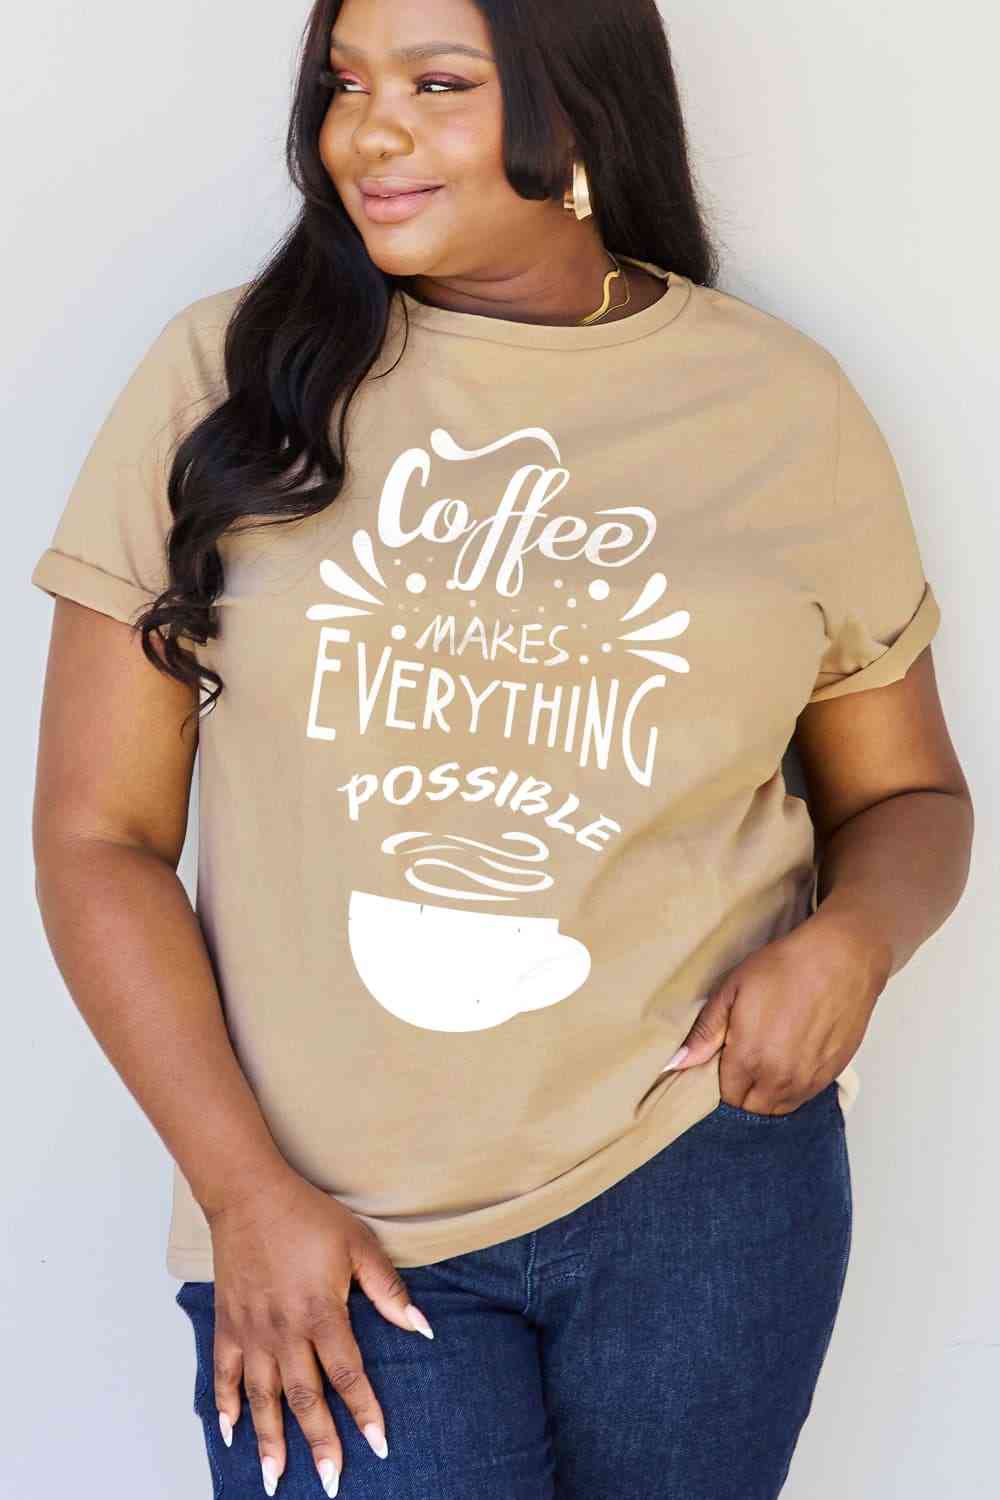 COFFEE MAKES EVERYTHING POSSIBLE Graphic Cotton Tee - T-Shirts - Shirts & Tops - 1 - 2024